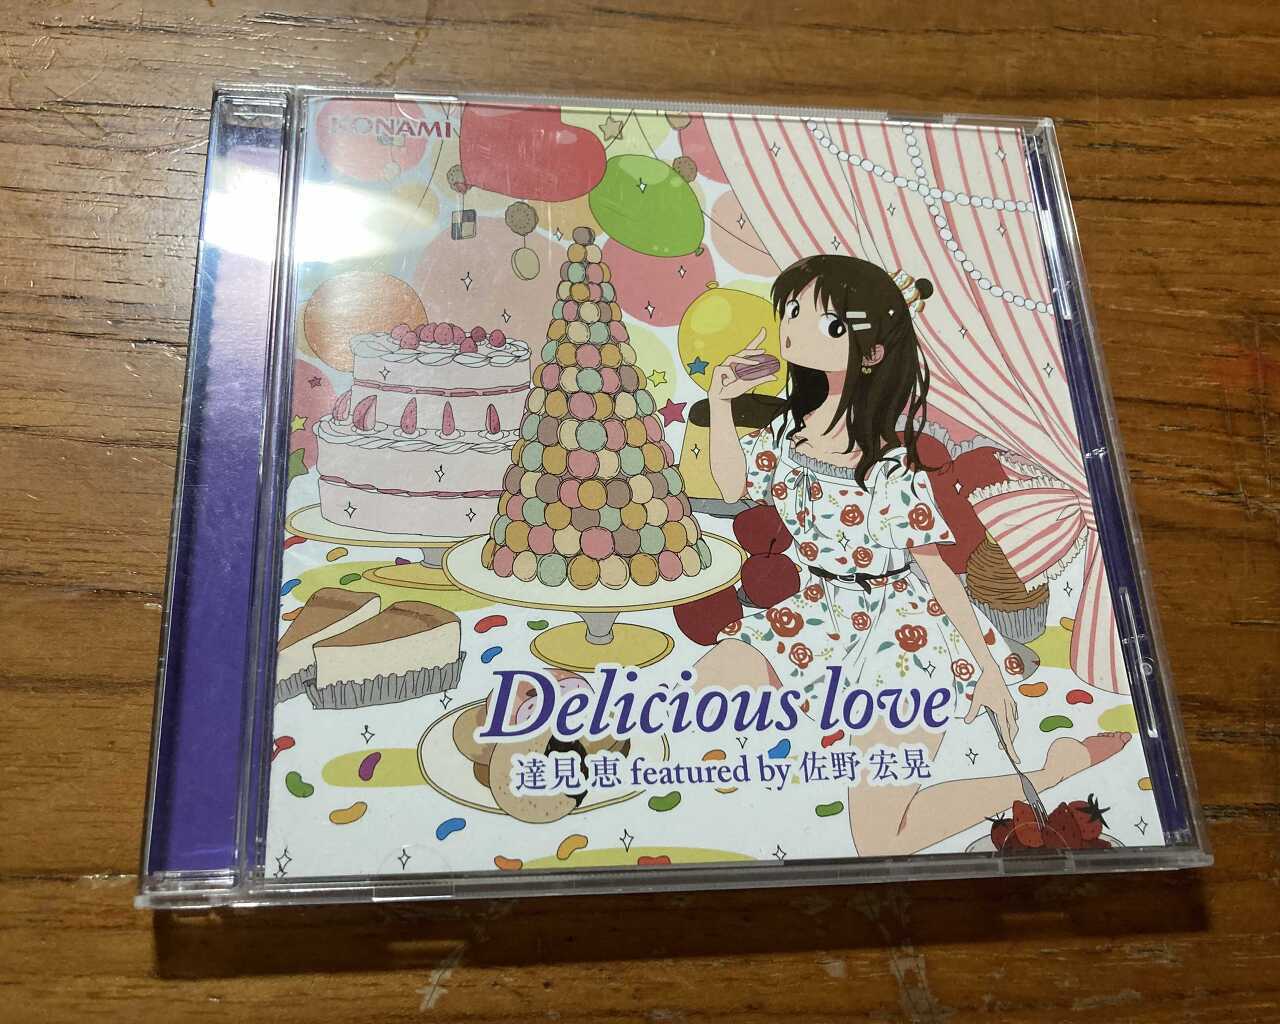 CD】Delicious love 達見恵 featured by 佐野宏晃 - CD